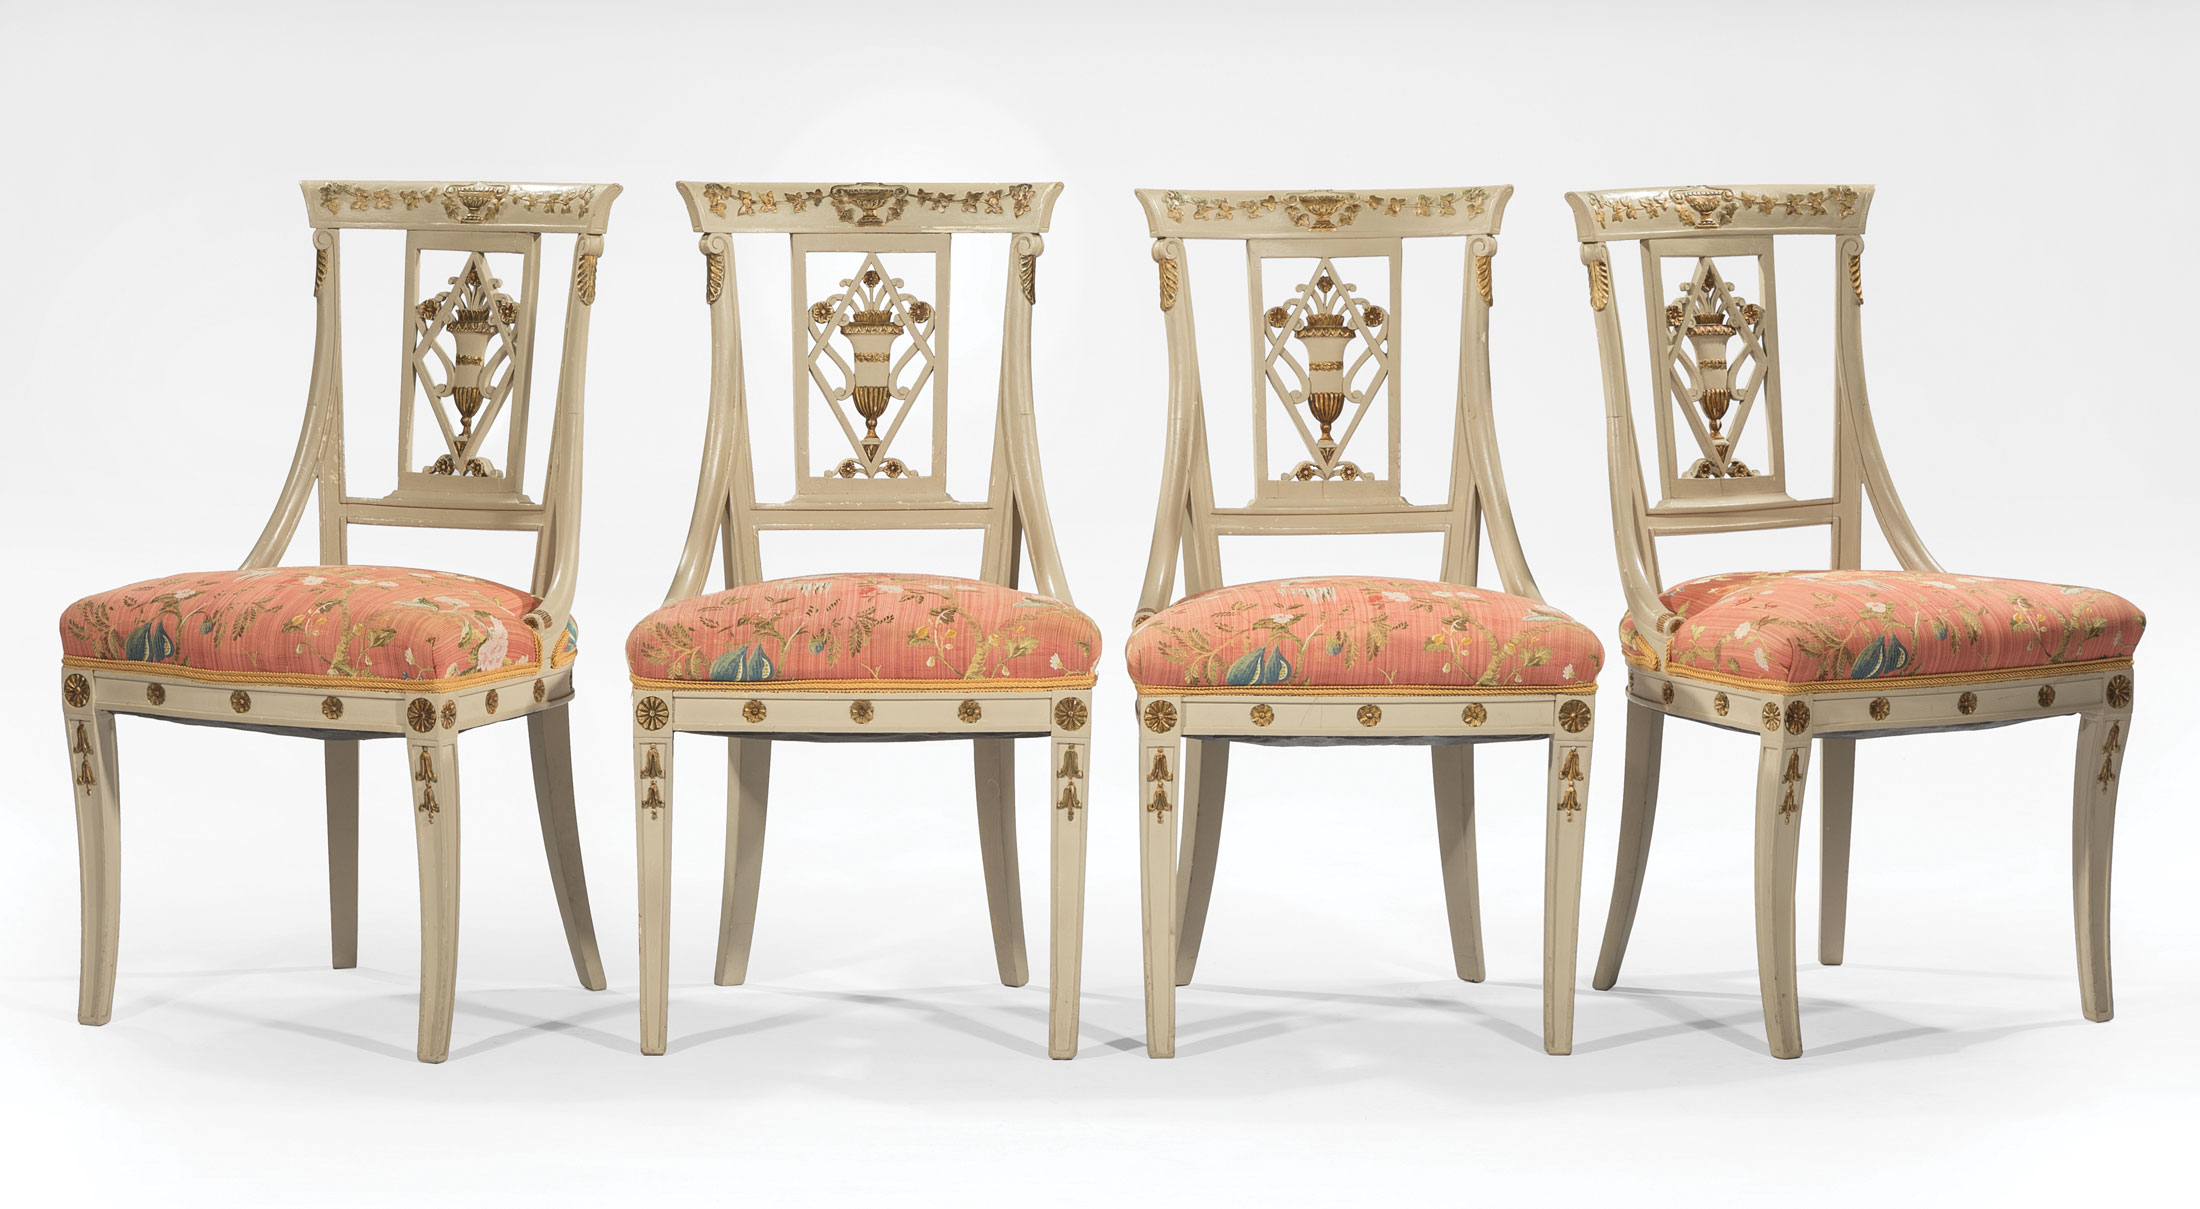 Four Directoire-Style Painted and Parcel Gilt Side Chairs , crest rail and pierced back with urn and - Image 2 of 3